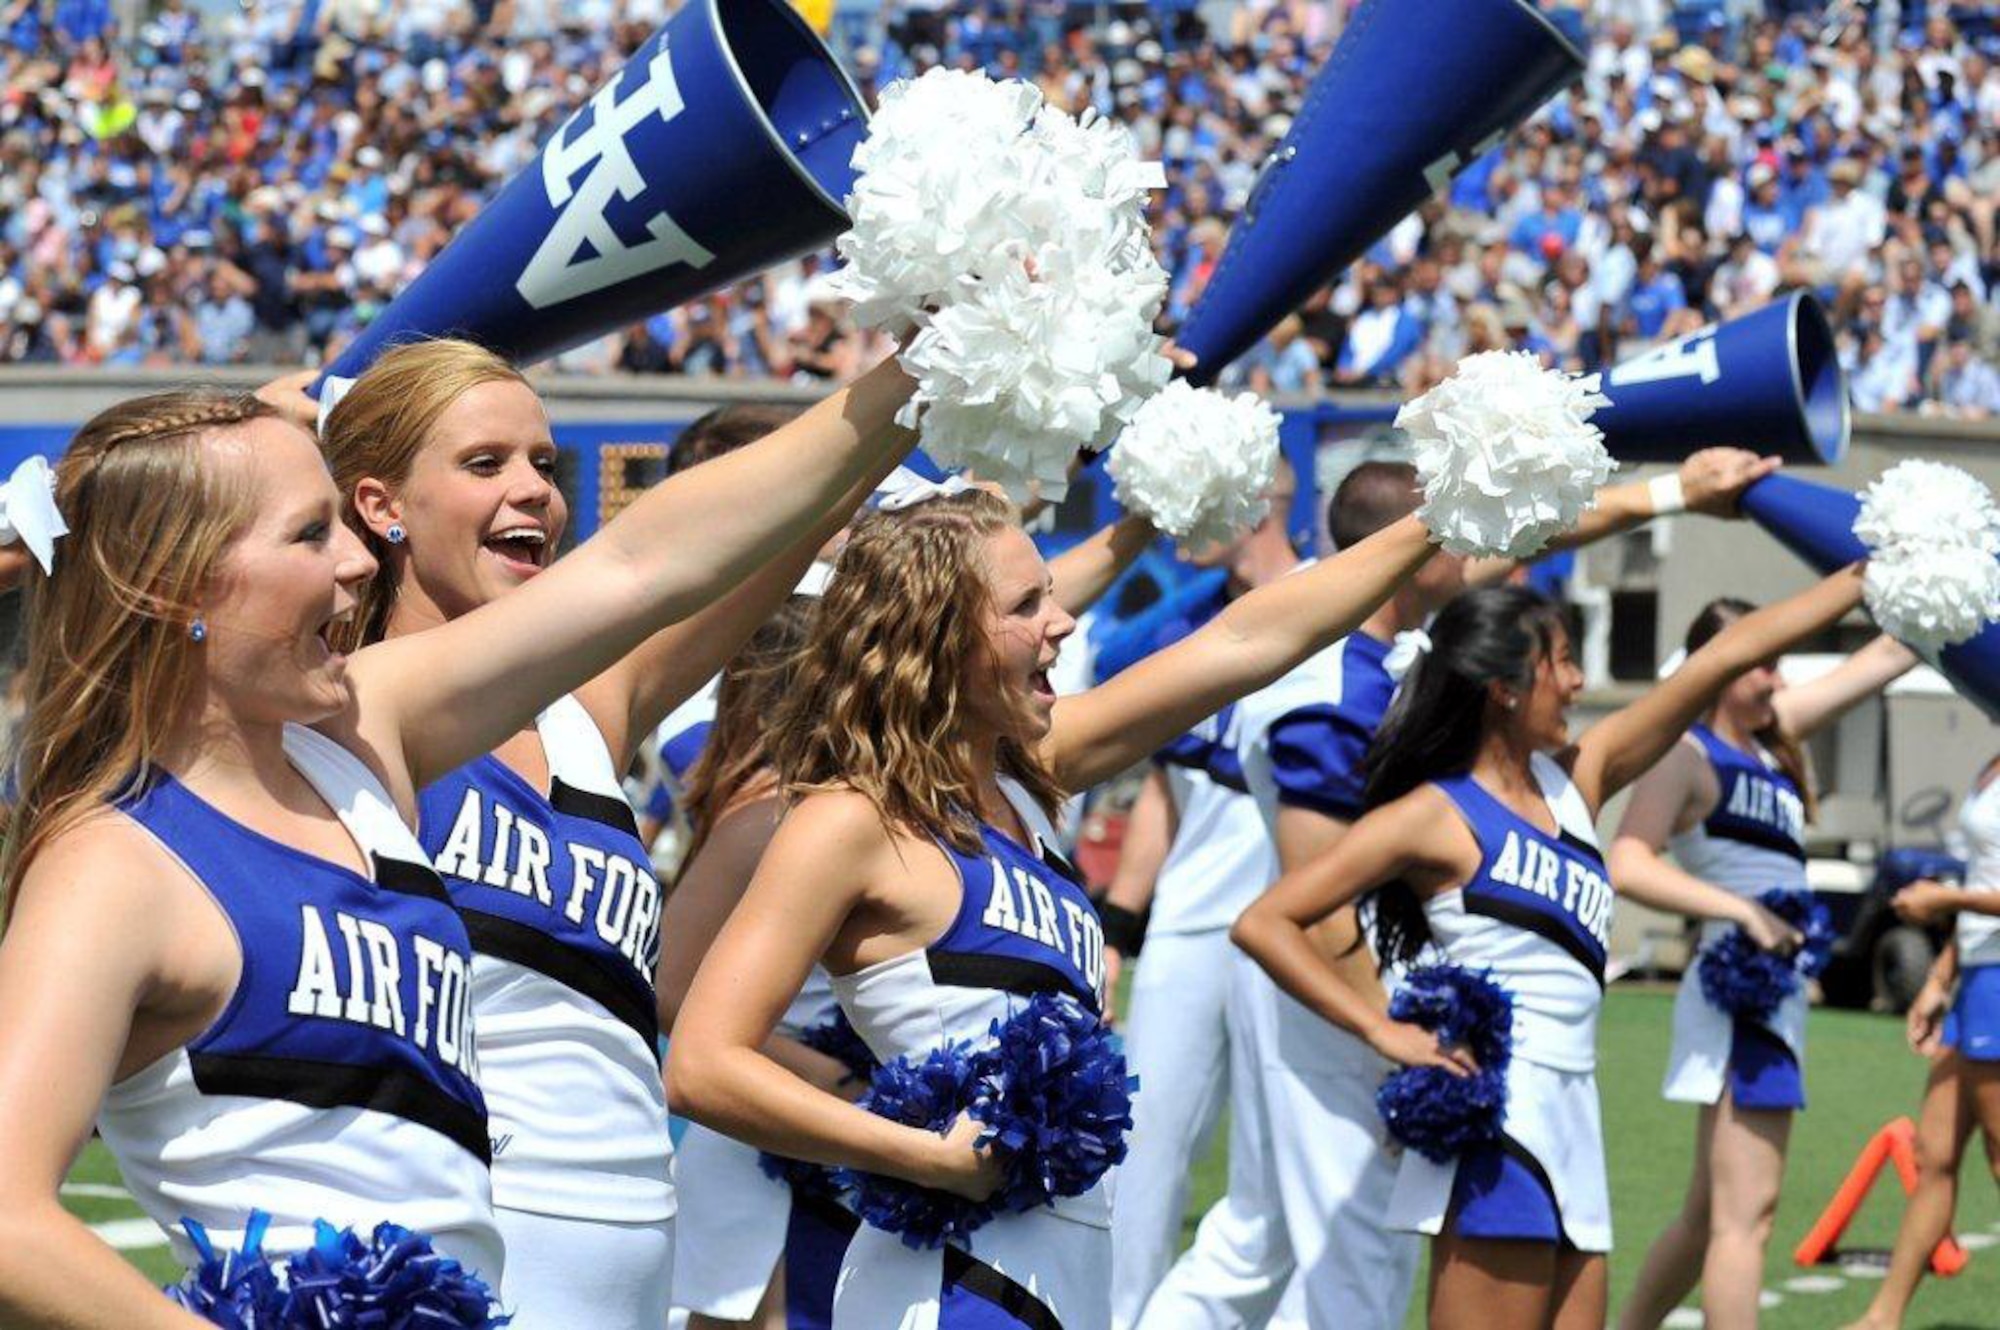 Academy cheerleaders encourage their team, community > United States Air  Force Academy > Features